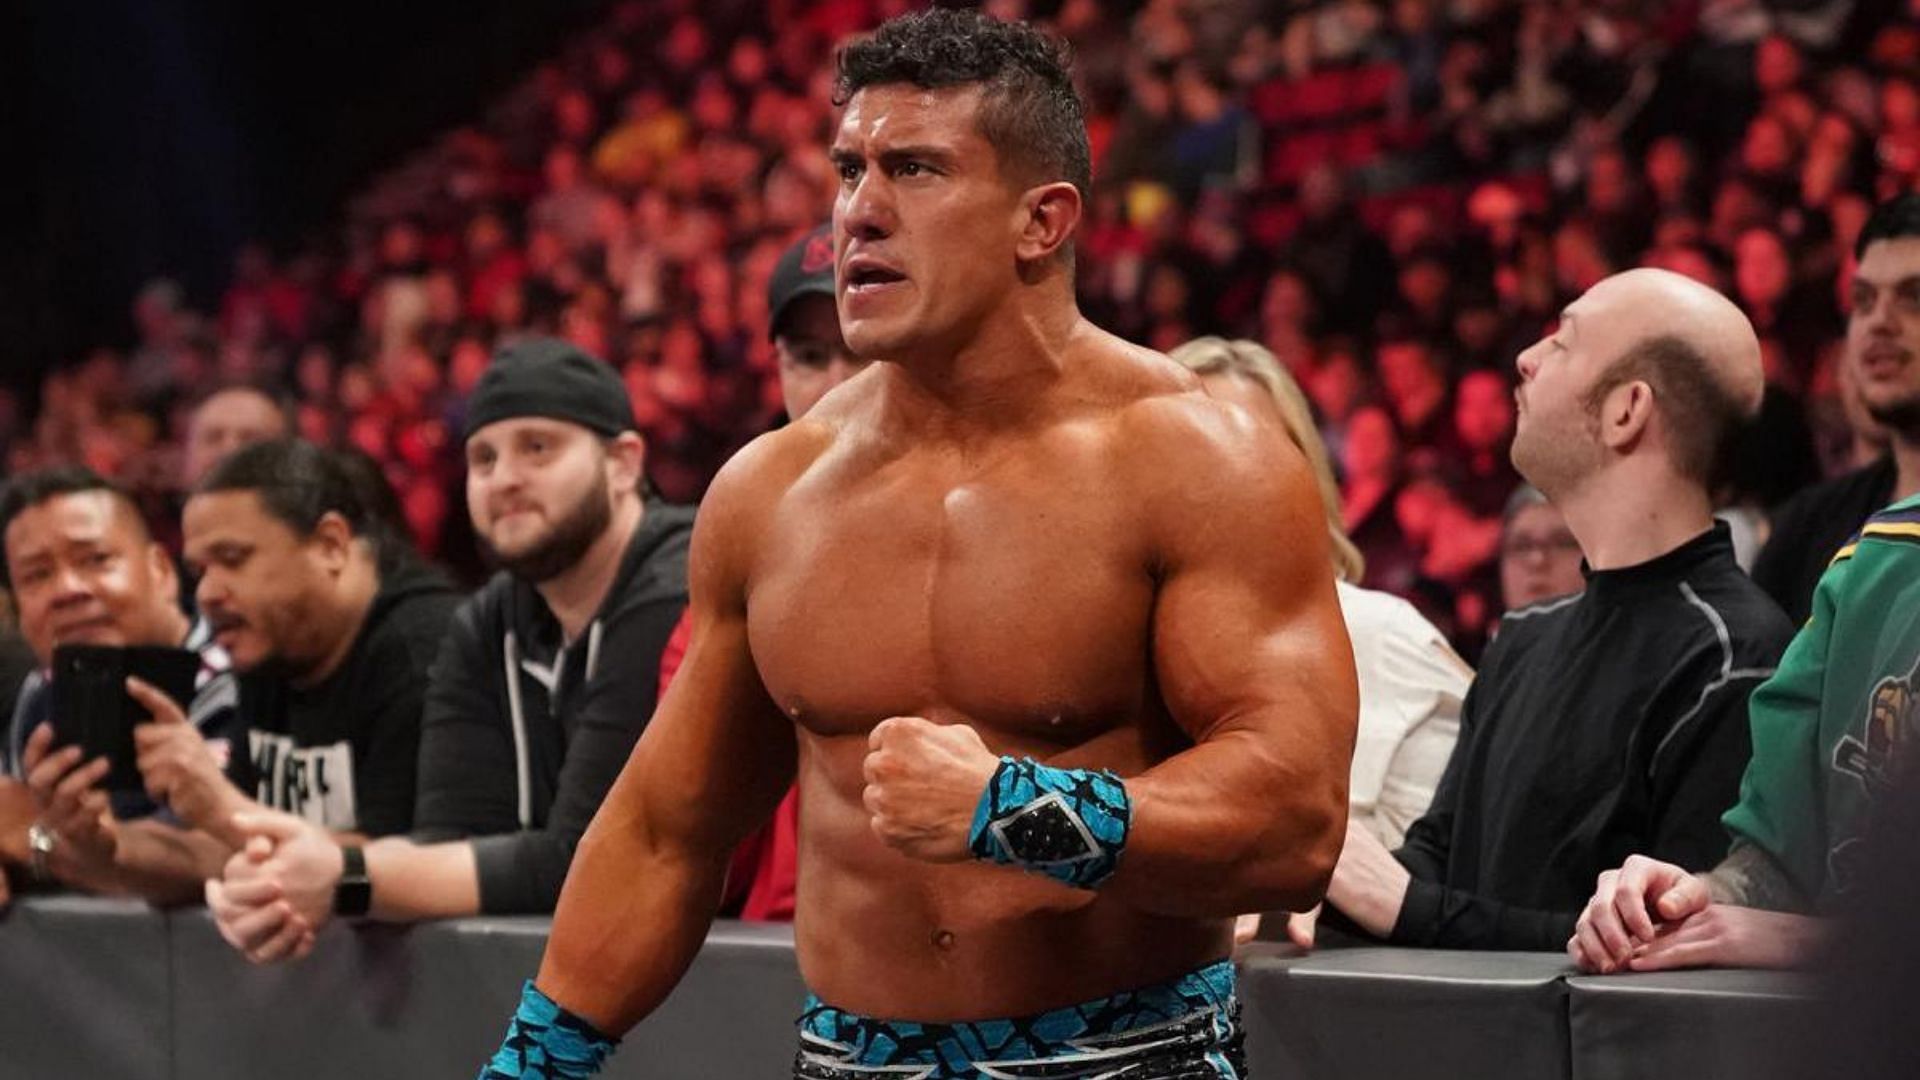 EC3 had some interesting comments this week